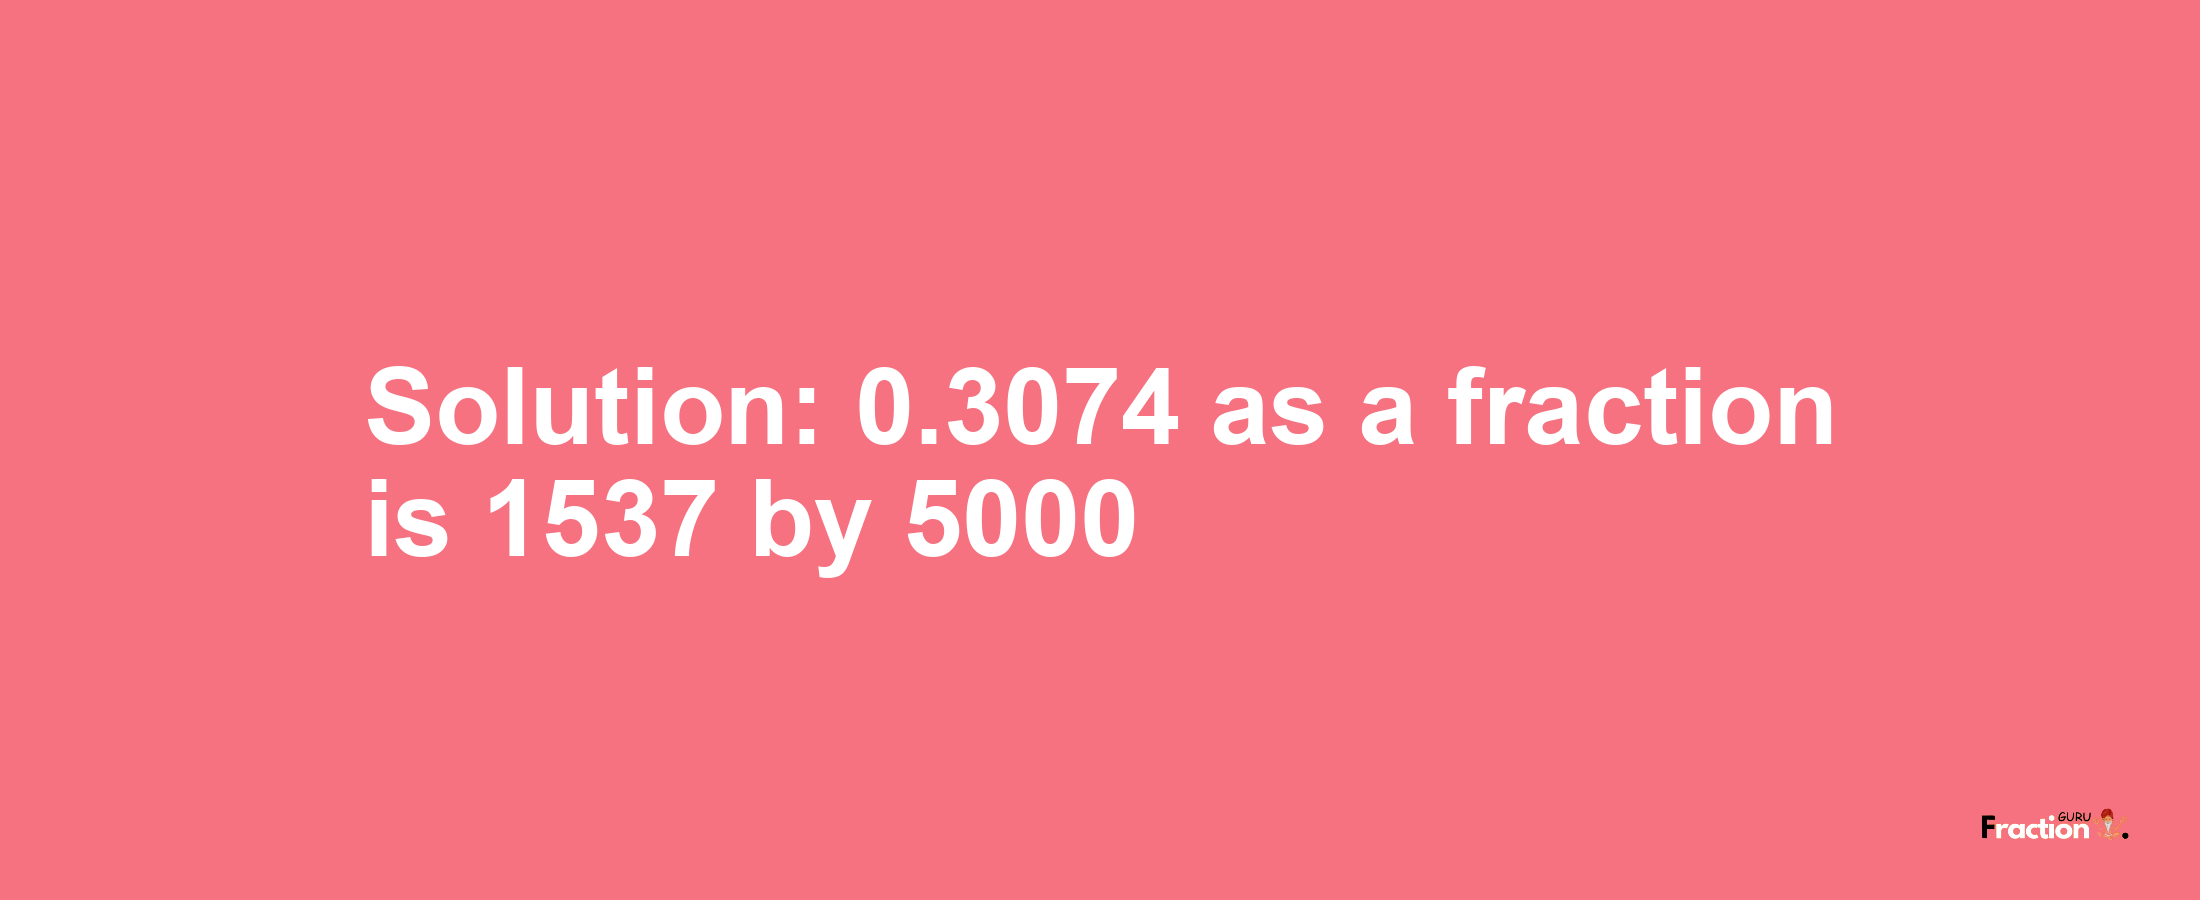 Solution:0.3074 as a fraction is 1537/5000